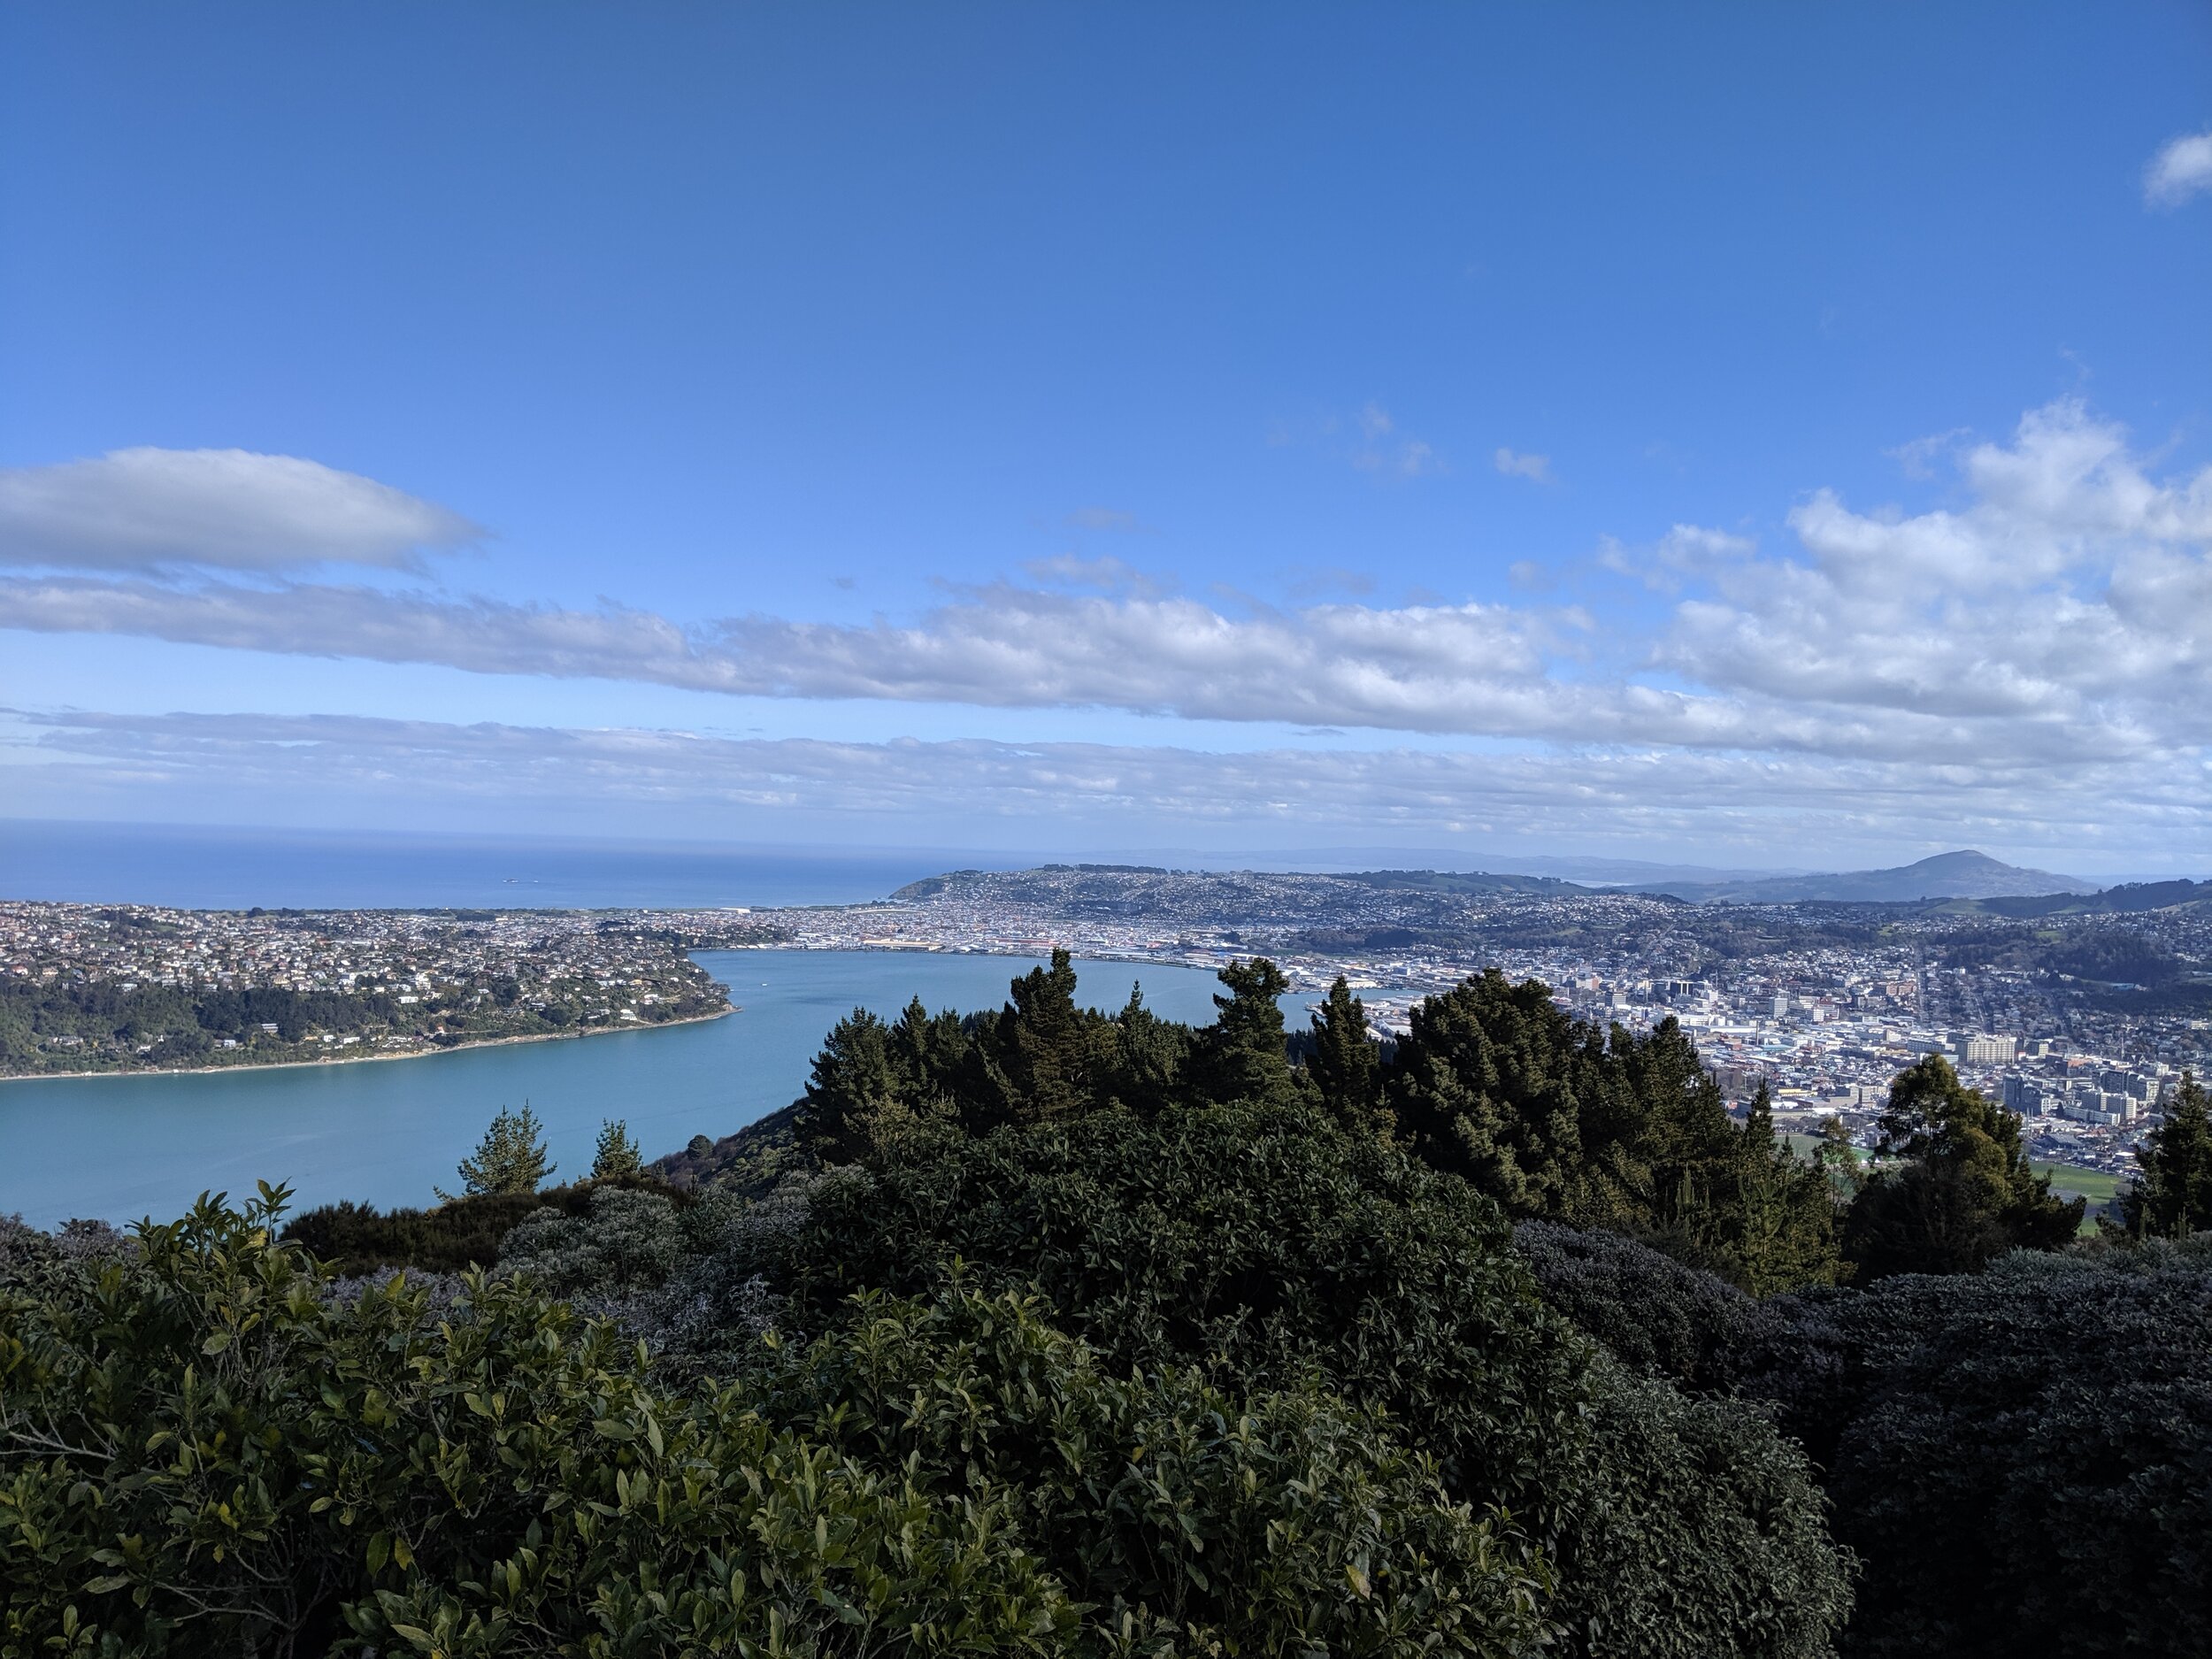  View of Otago Peninsula (left) and Dunedin (right) from Signal Hill Lookout. 